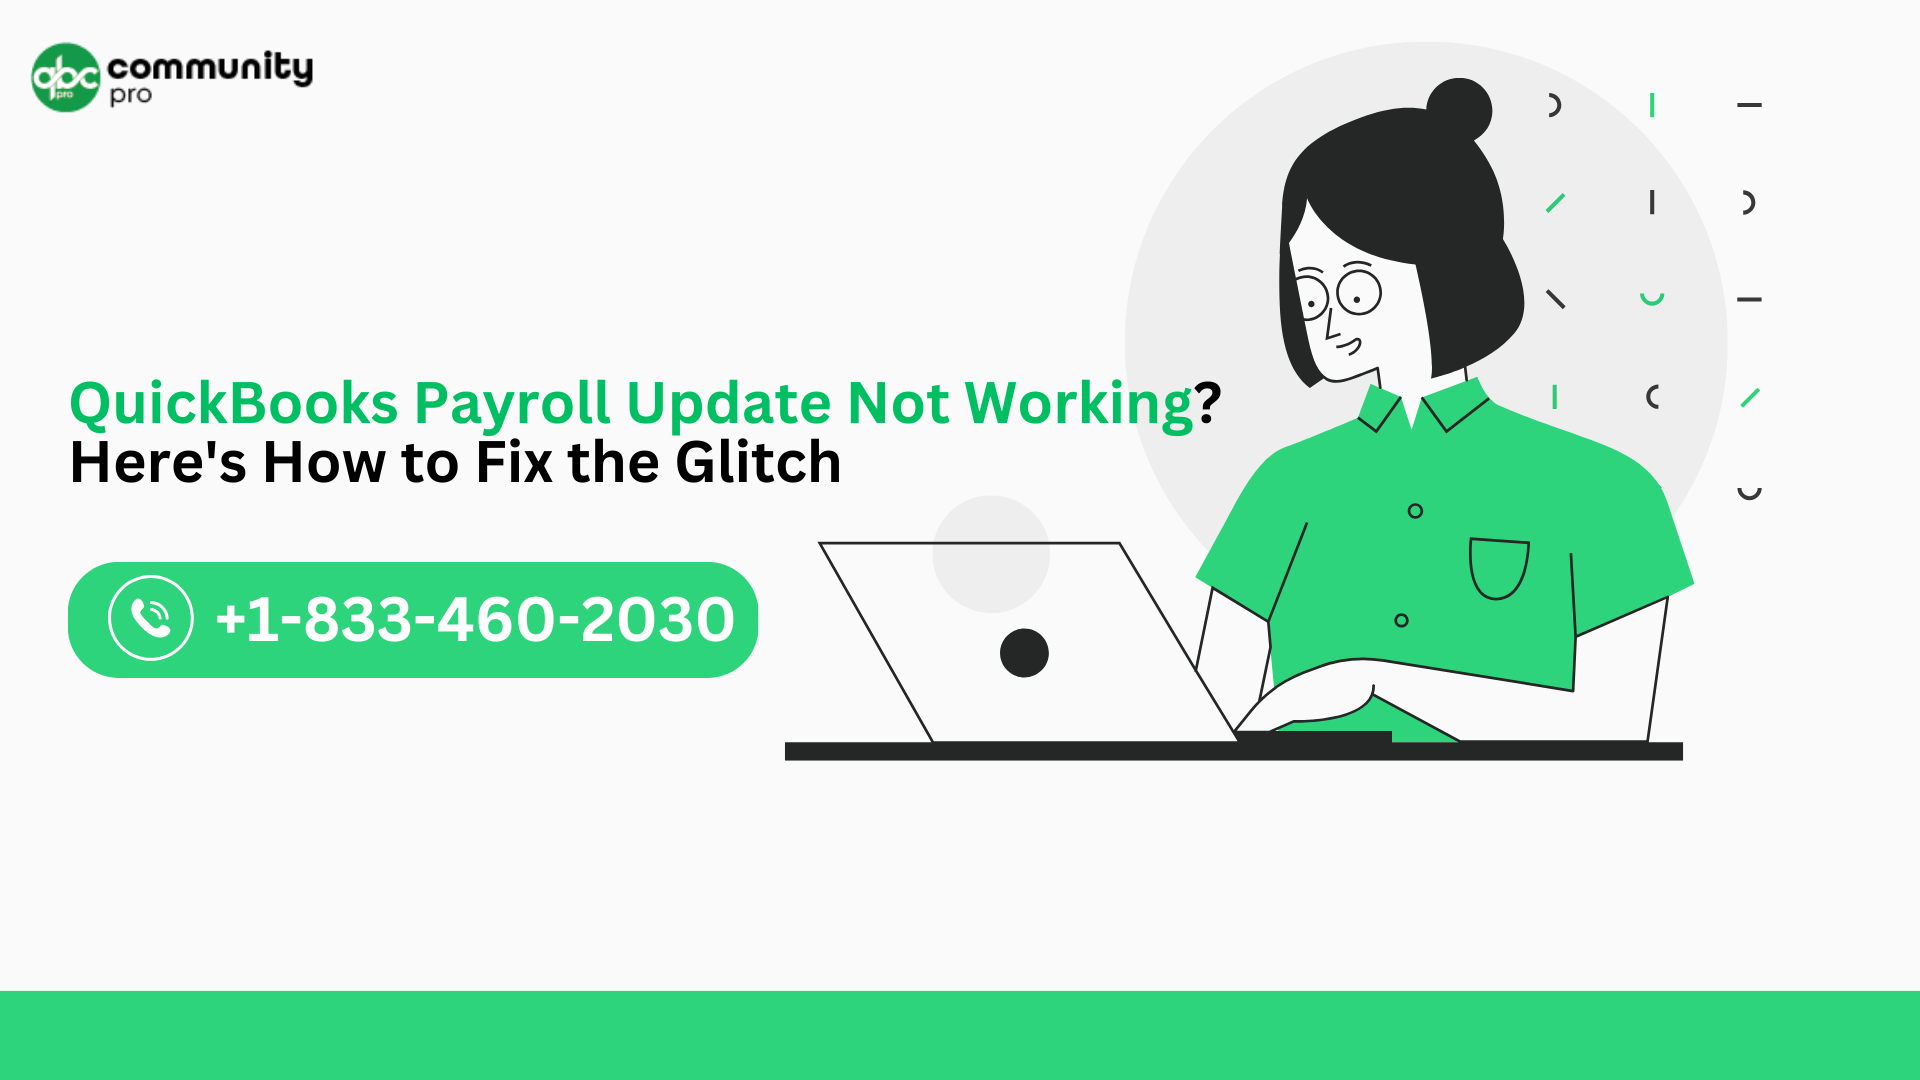 QuickBooks Payroll Update Not Working? Here’s How to Fix the Glitch